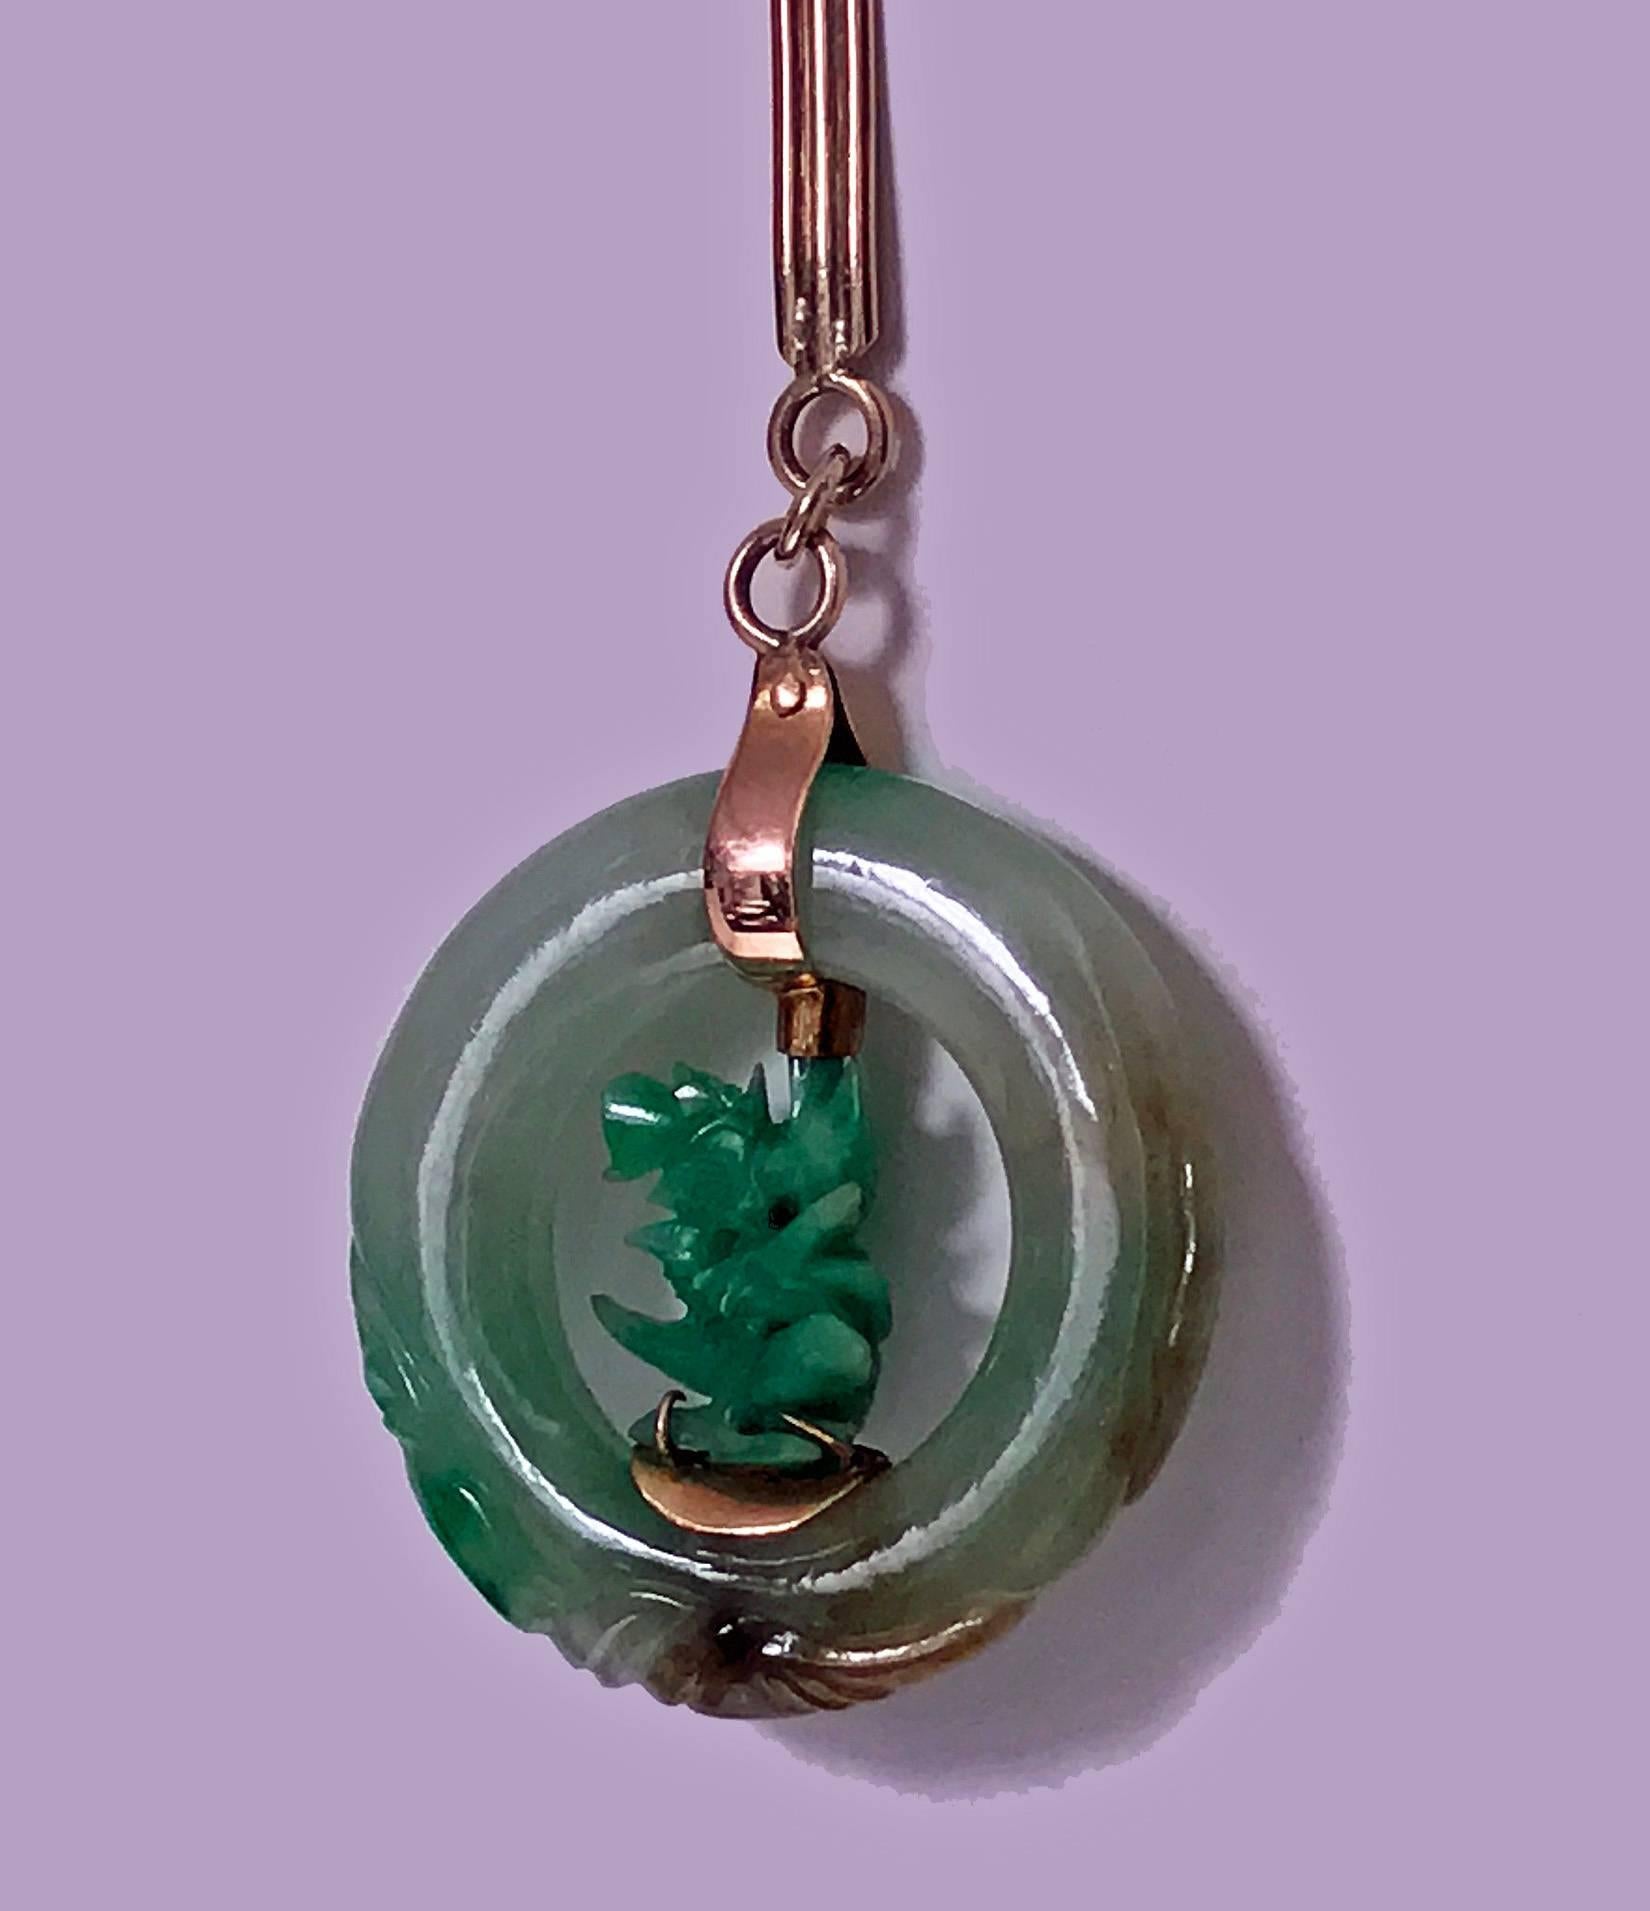 Jadeite jade circle pendant in 14-carat. Large jadeite jade circle of a white yellow green and red tones, surround carving possibly fish. Inside the jadeite circle is a carved green jadeite Jade. Excellent polish and carving. Diameter of circle: 35